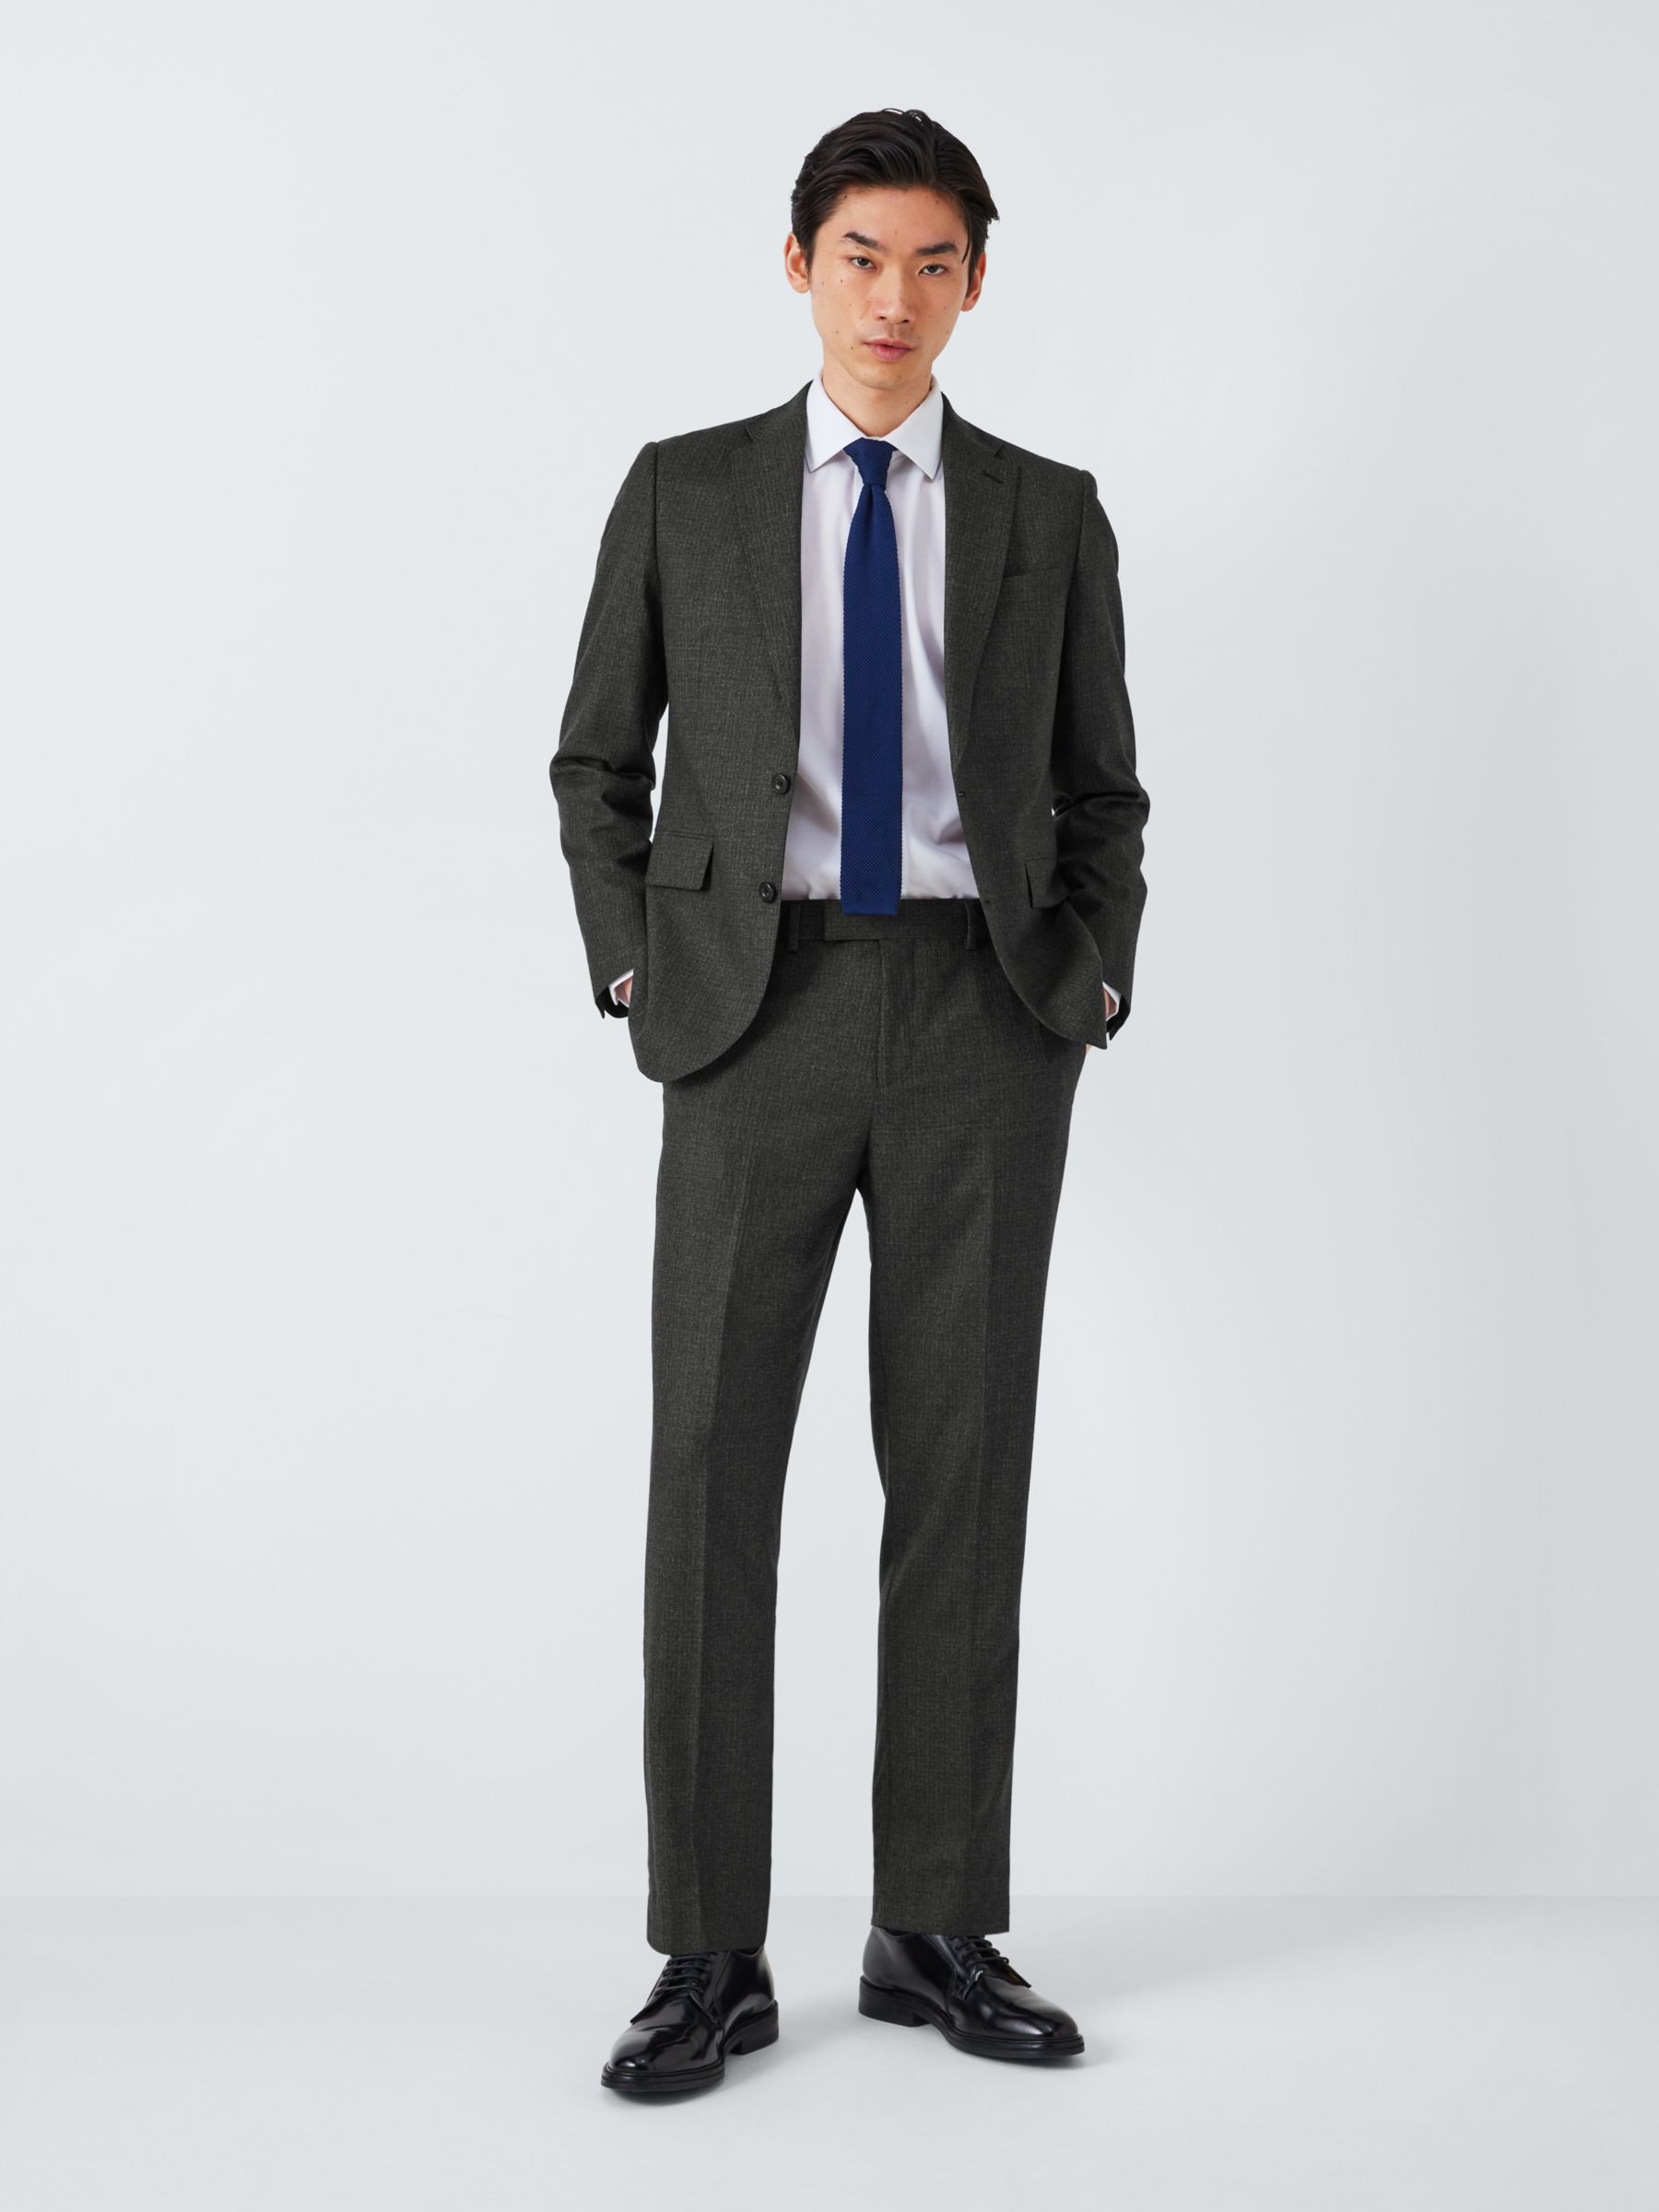 Buy John Lewis Zegna Recycled Wool Regular Fit Suit Trousers Online at johnlewis.com